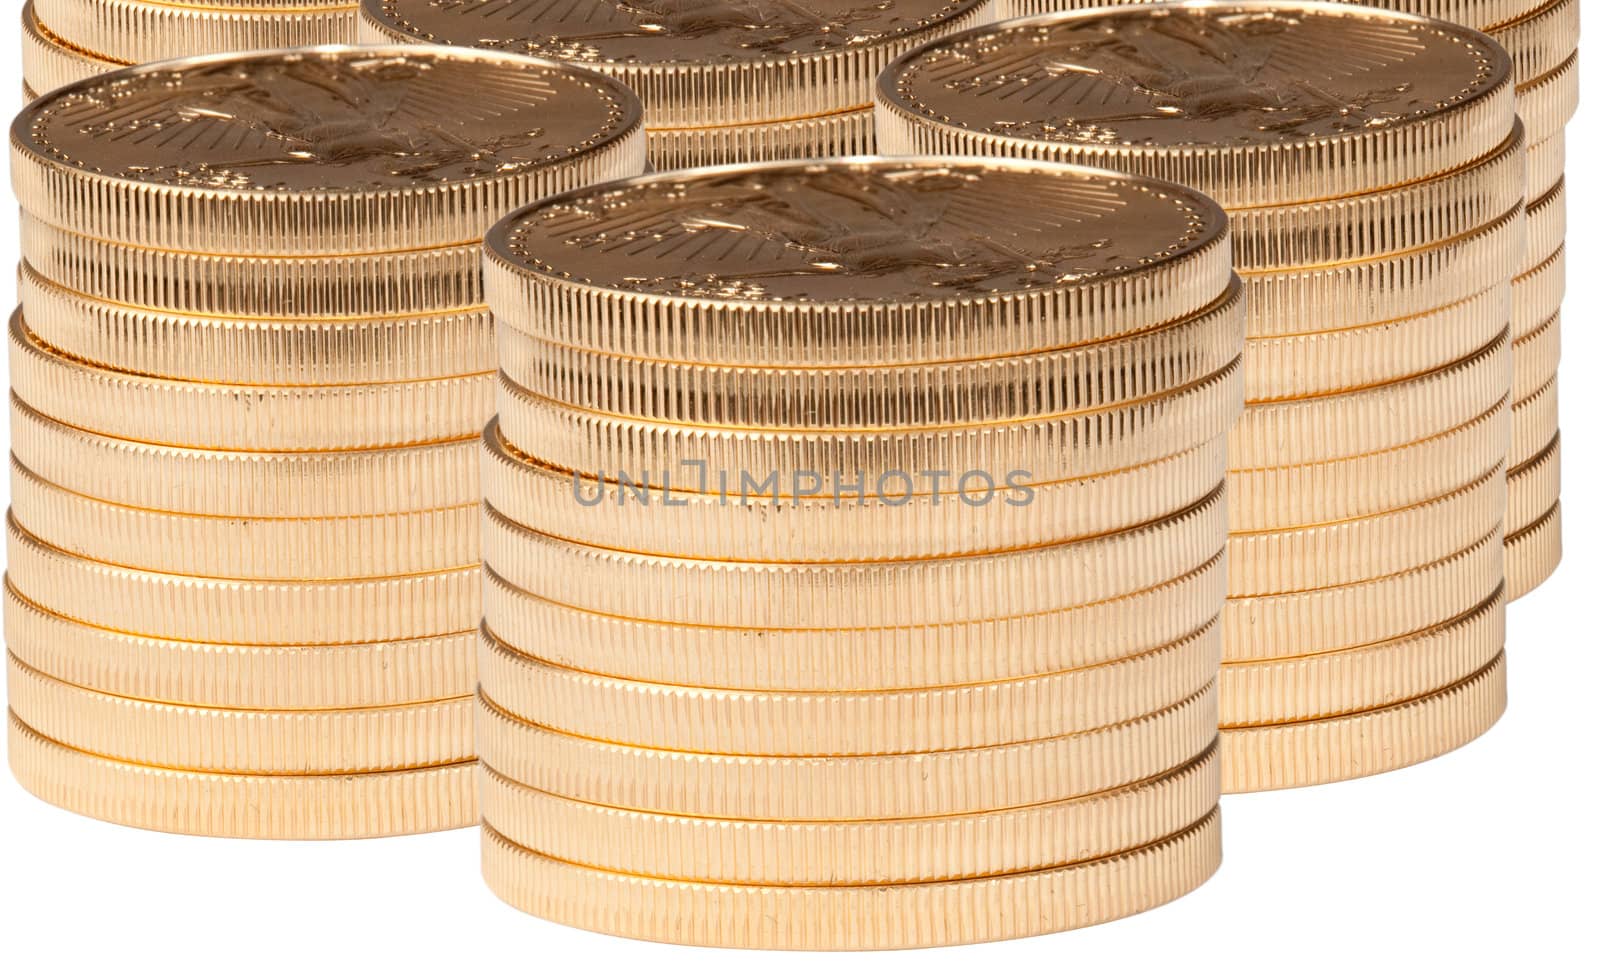 Stacks of pure gold coins by steheap